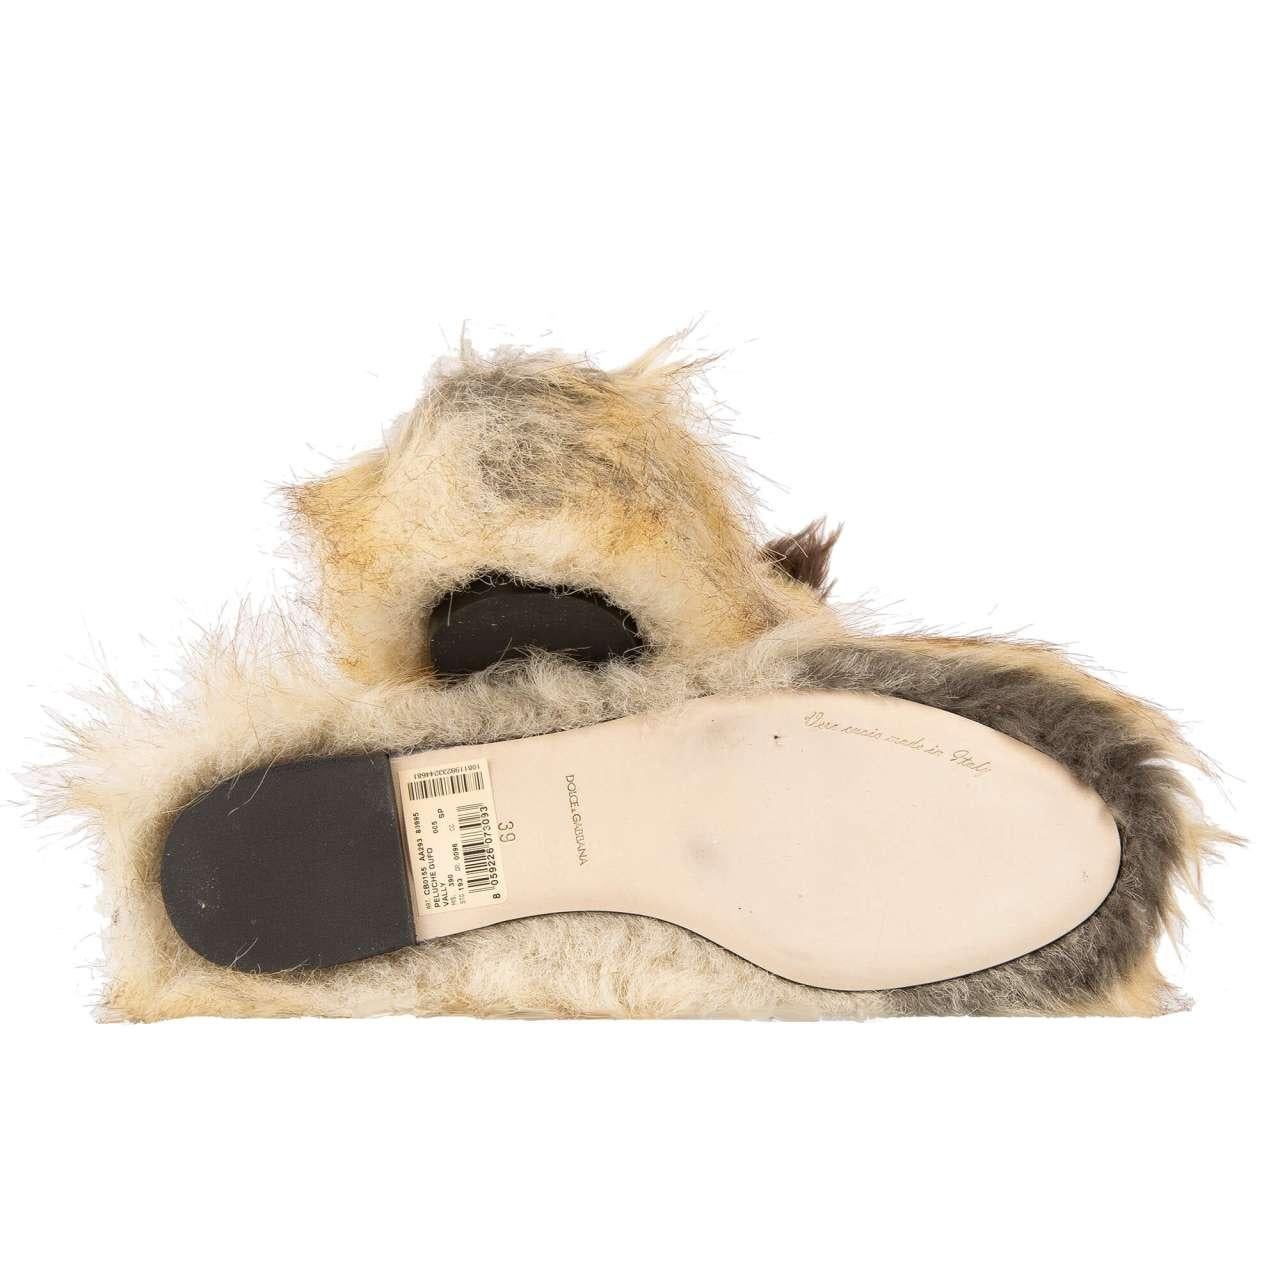 Dolce & Gabbana - Owl Toy Eco Faux Fur Ballet Flats VALLY Brown 39.9 For Sale 2